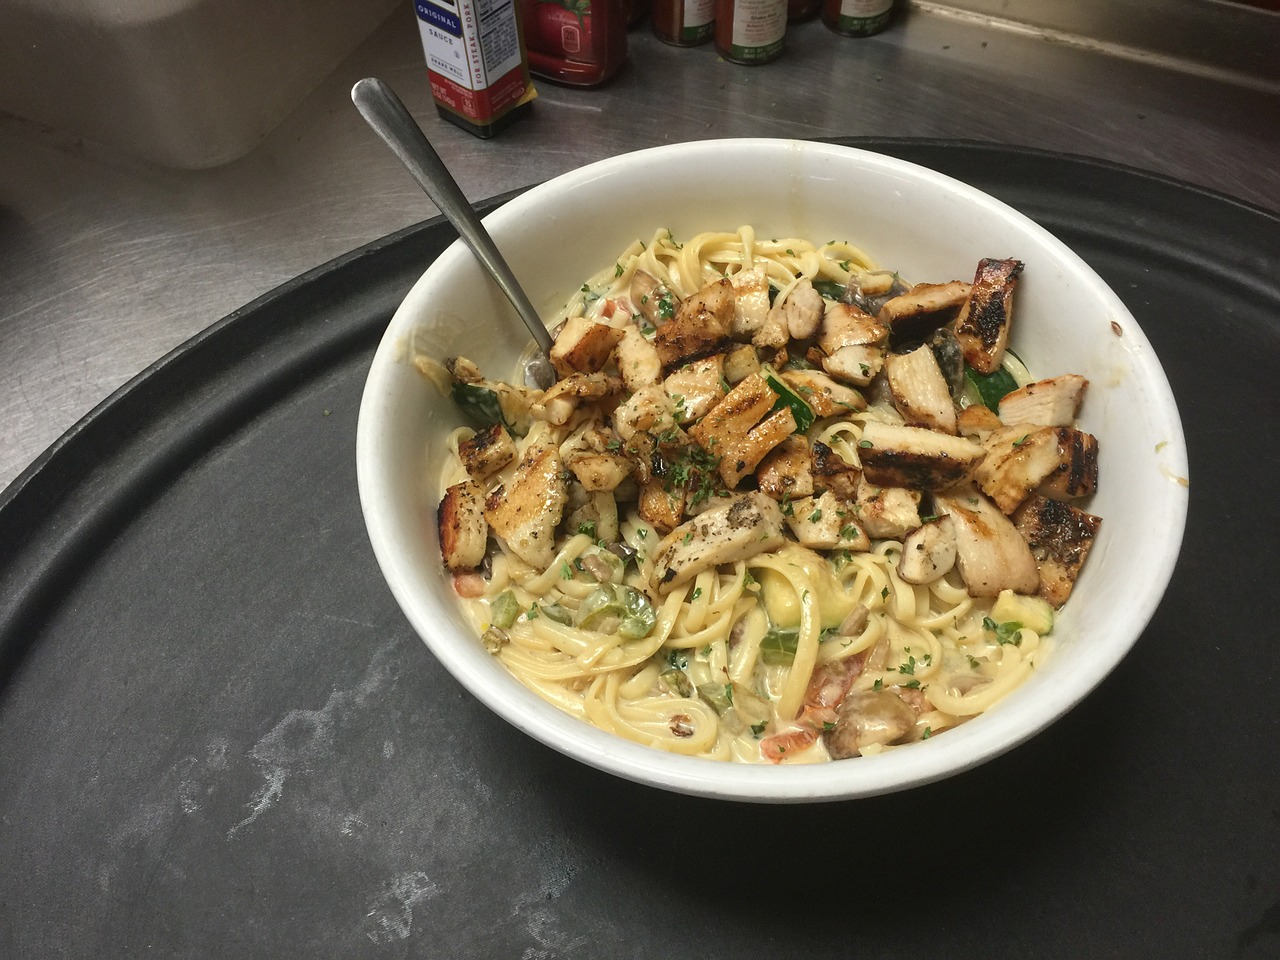 Parmesan Pasta with Grilled Chicken and Broccoli